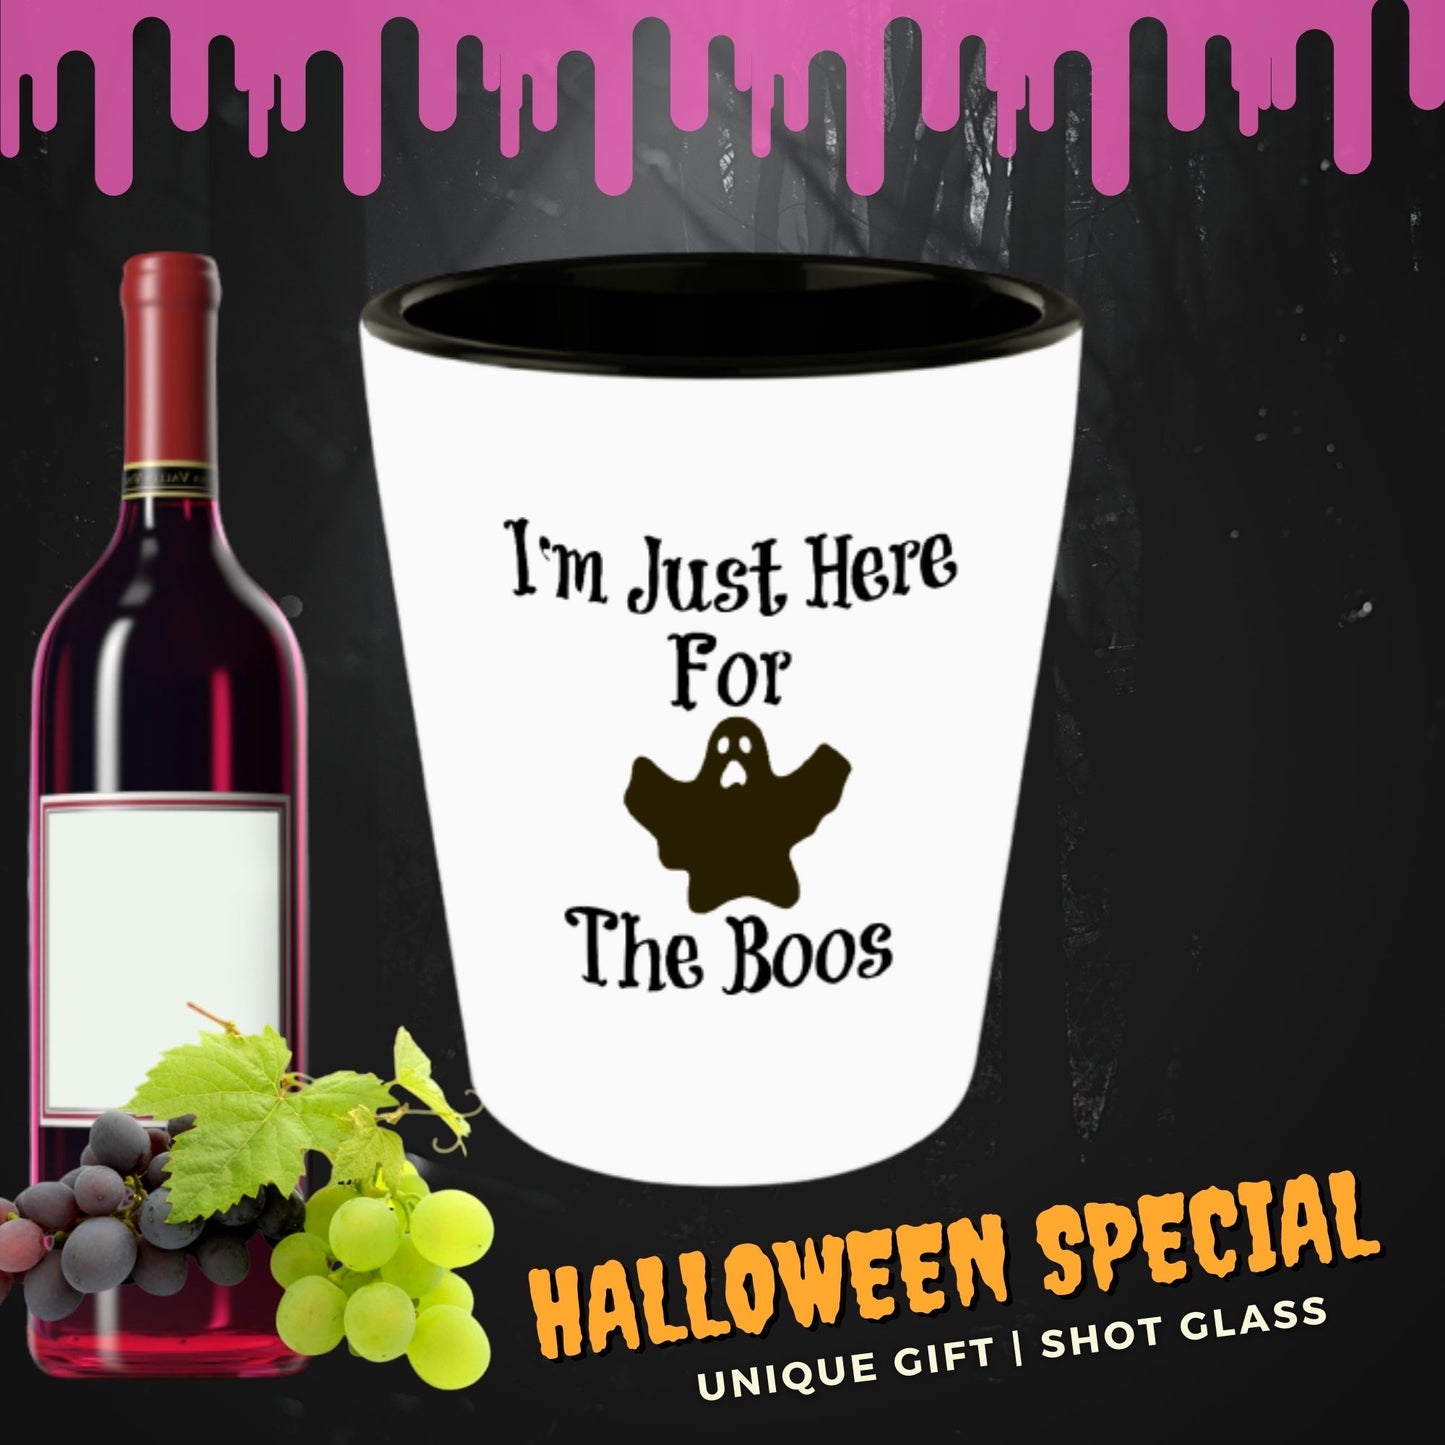 I'm Just Here For The Boos Novelty Shot Glass For Halloween Gifts Collectibles Ceramic